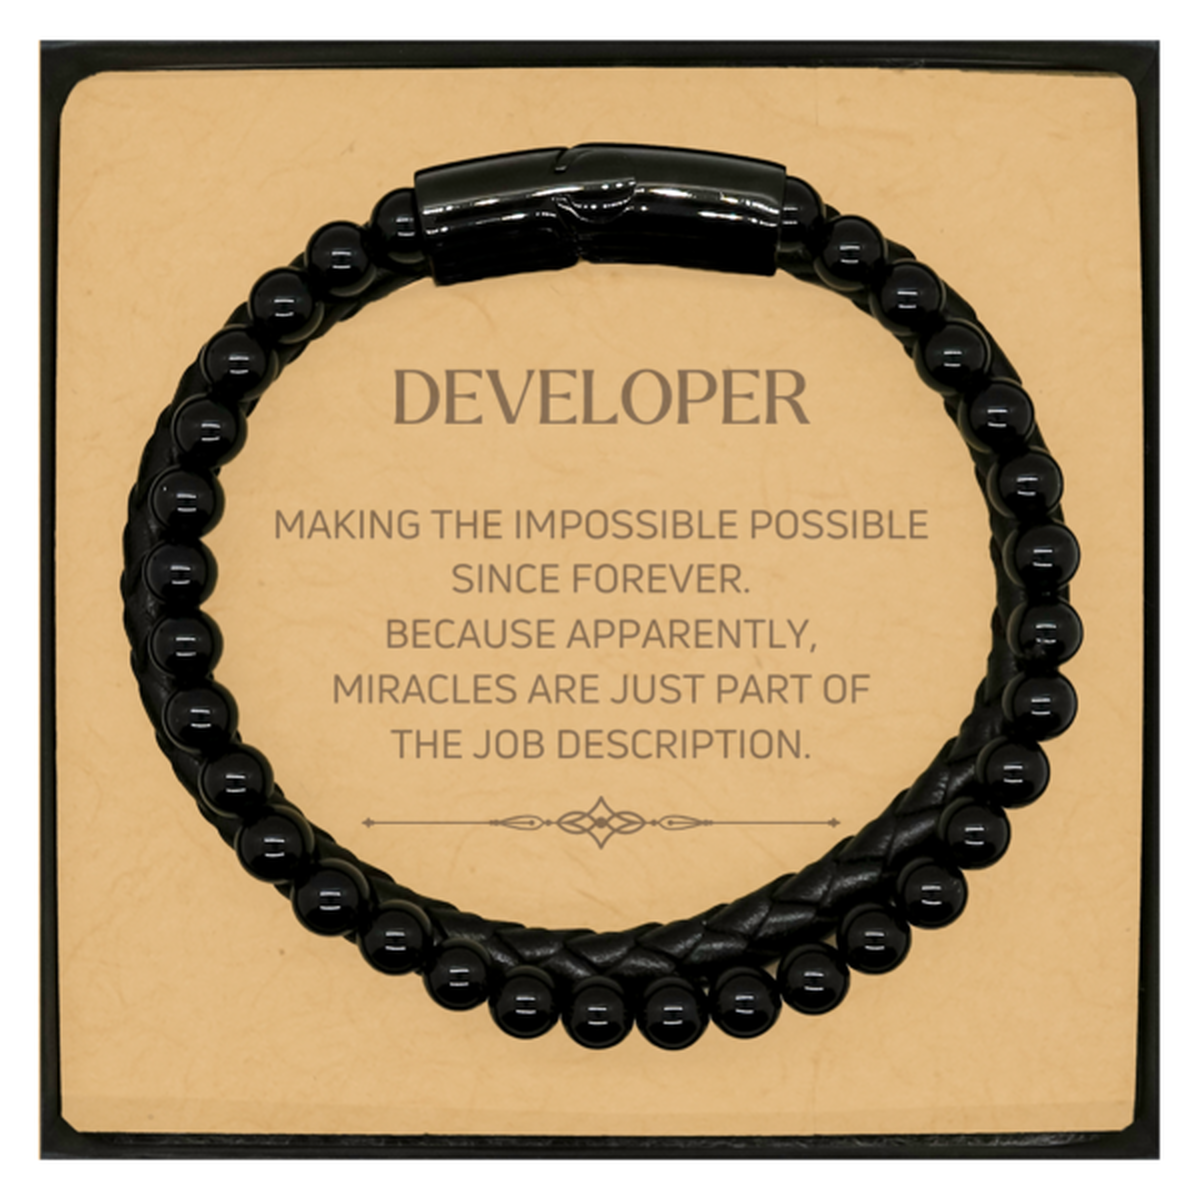 Funny Developer Gifts, Miracles are just part of the job description, Inspirational Birthday Christmas Stone Leather Bracelets For Developer, Men, Women, Coworkers, Friends, Boss